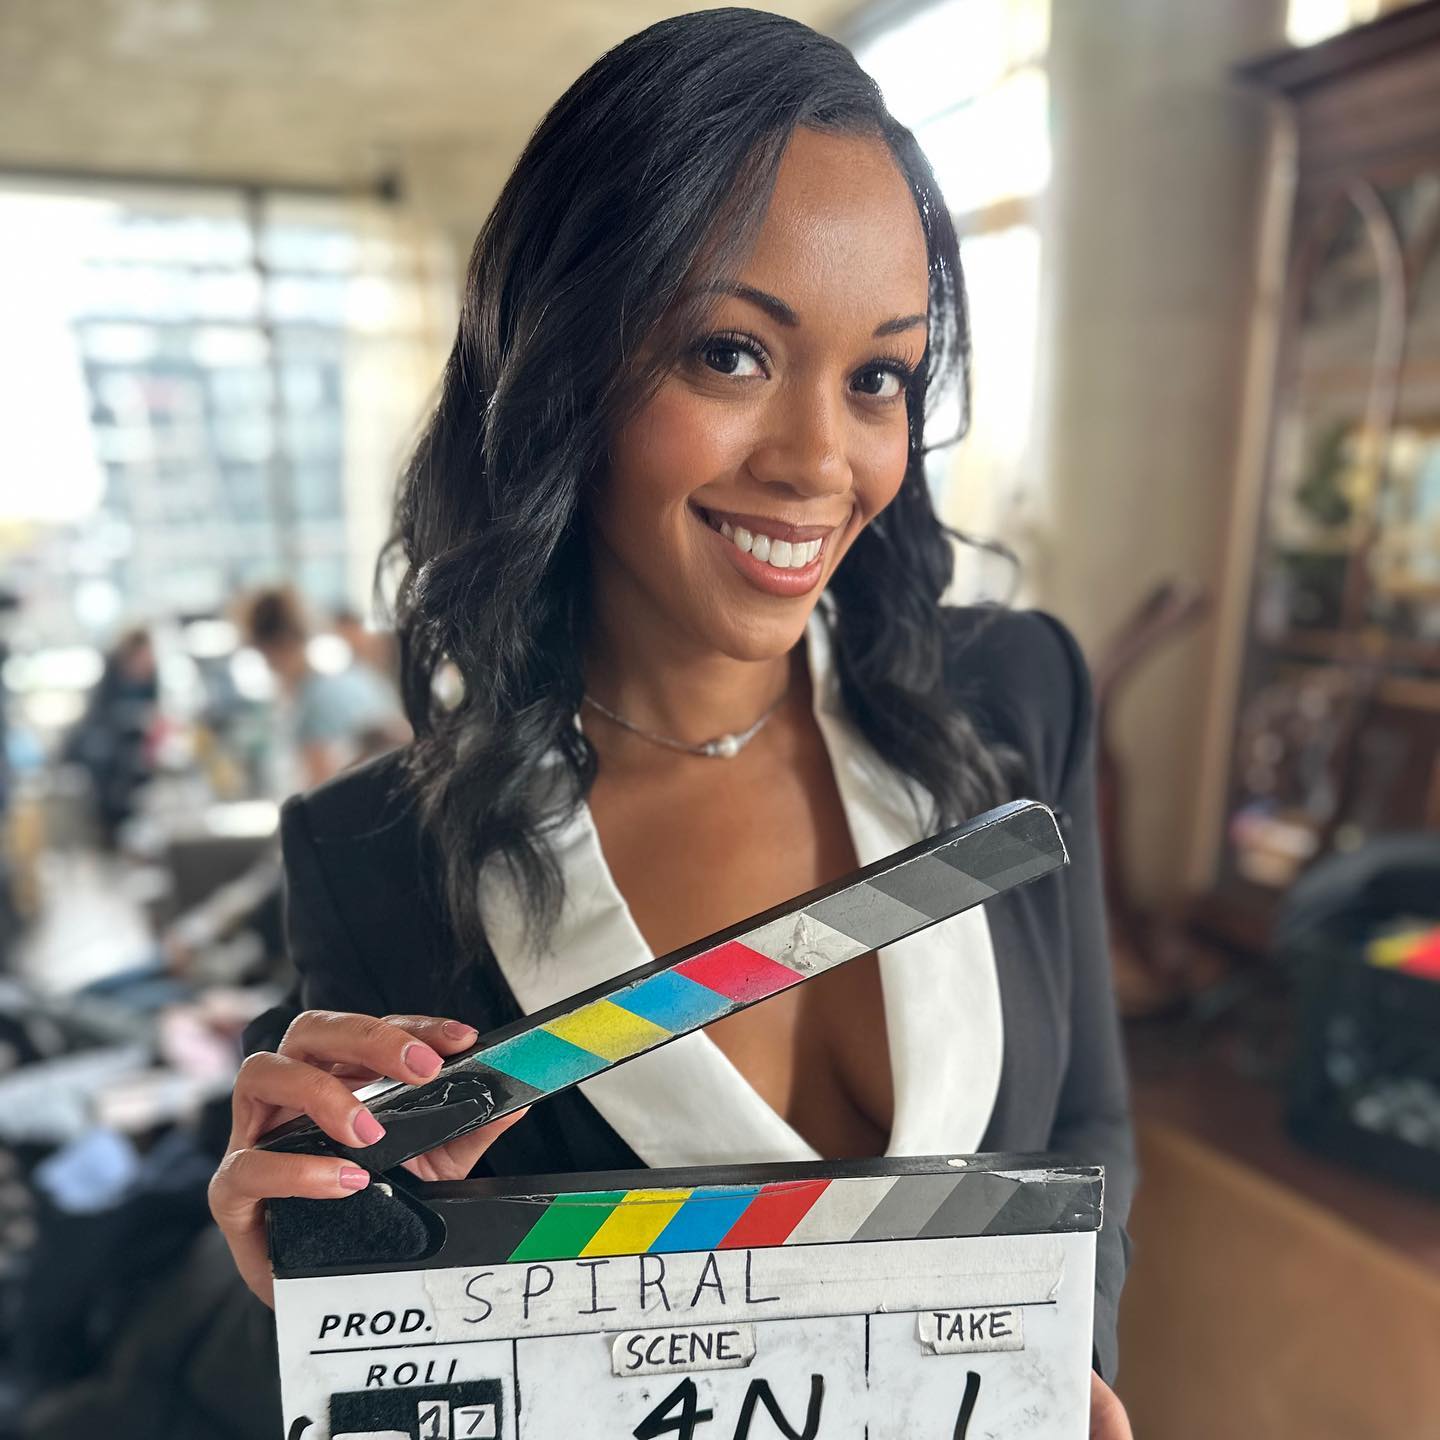 Mishael Morgan starring in the new movie Spiral. 